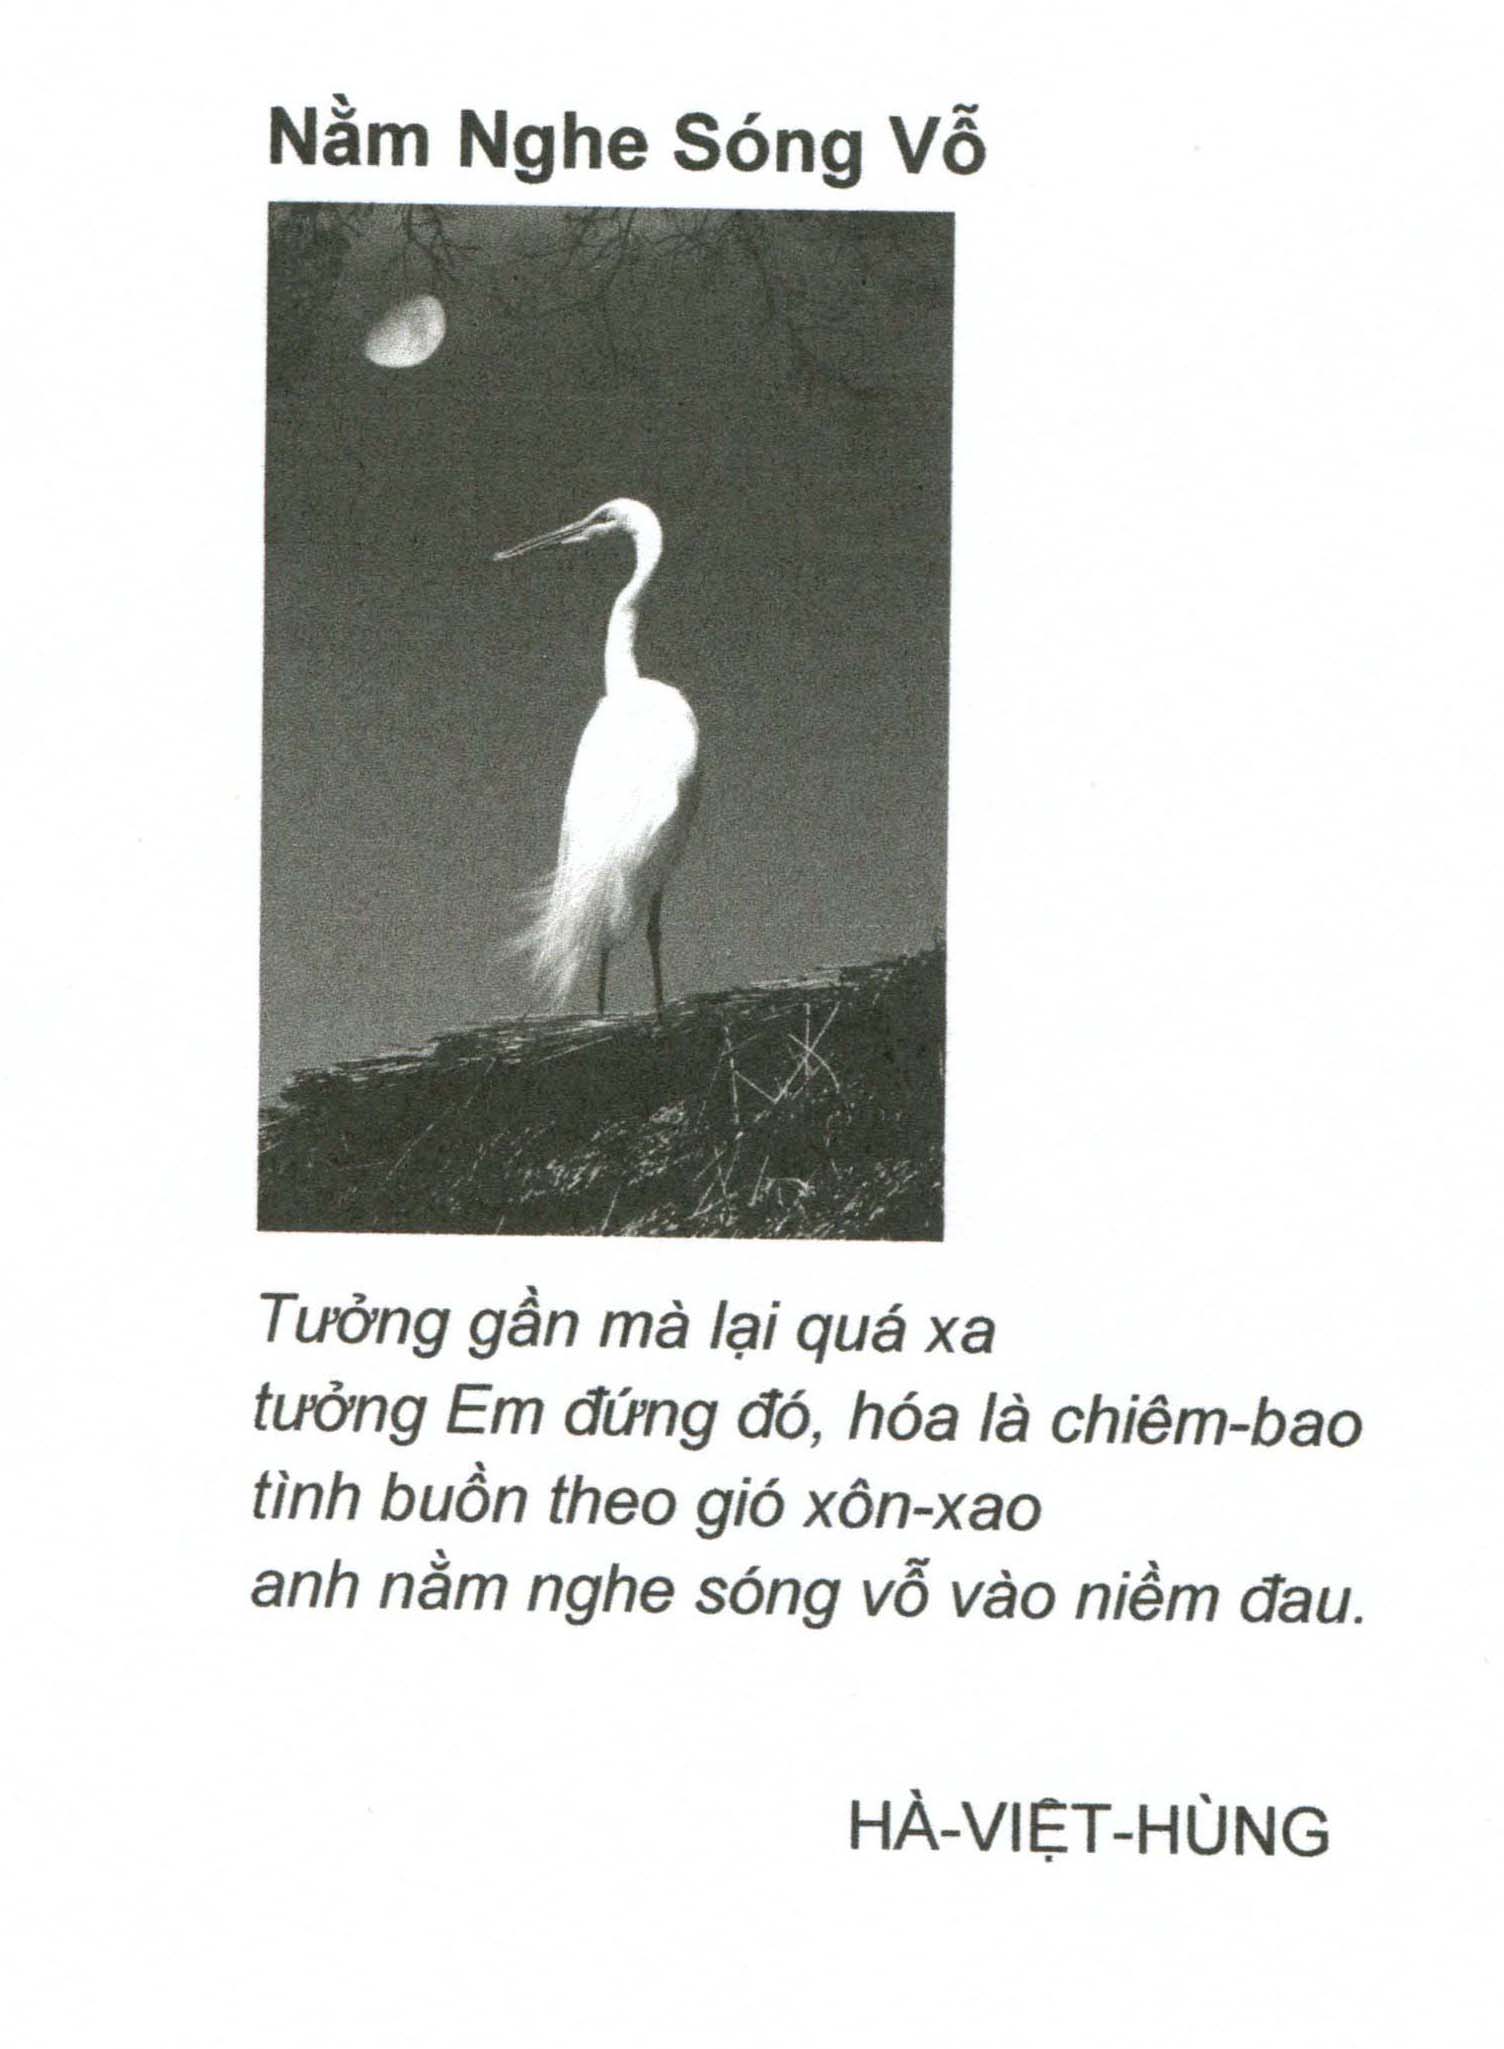 nam nghe song vo